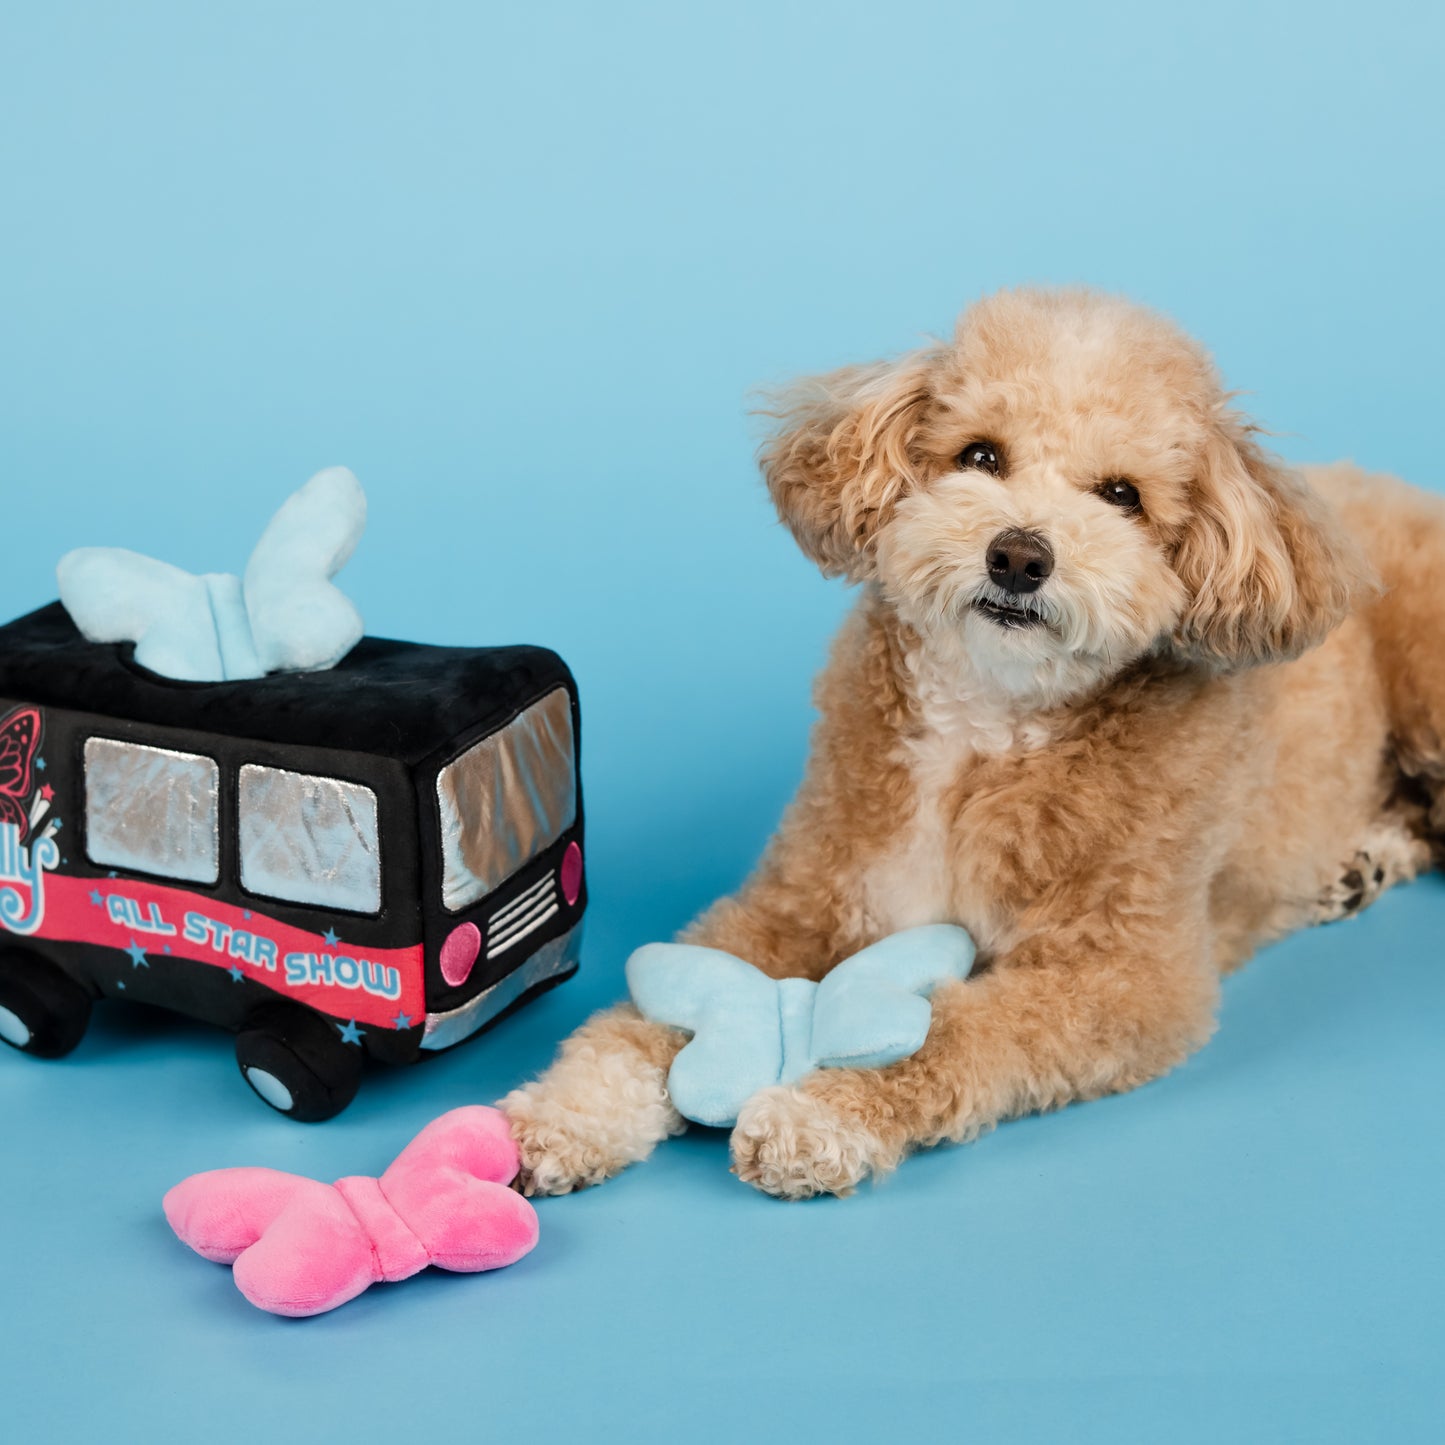 Dolly Tour Bus Hideaway Interactive Dog Toy